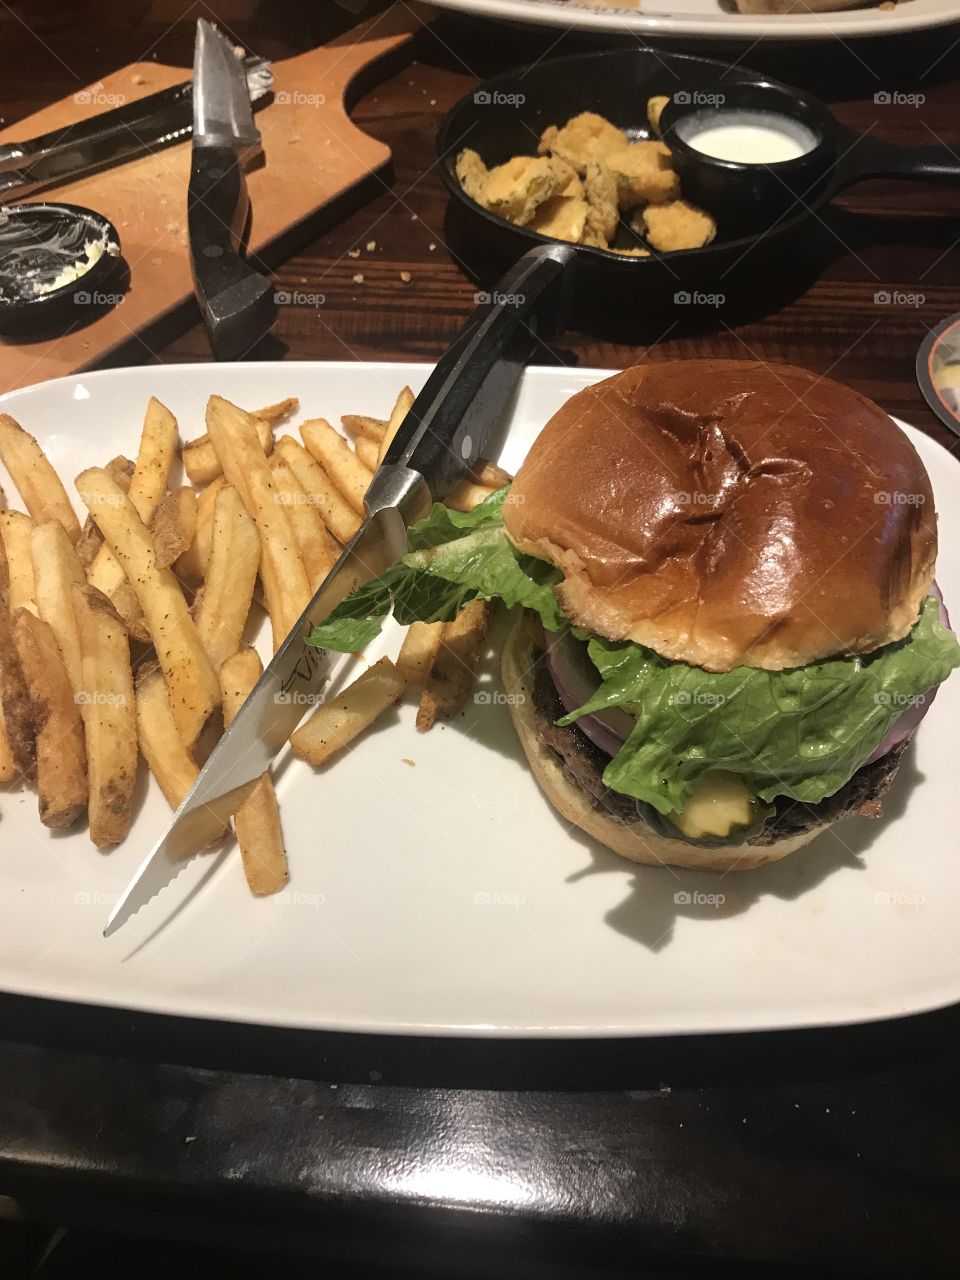 What’s more delicious than a juicy burger and hot salted fries? From a local restaurant in Idaho! 